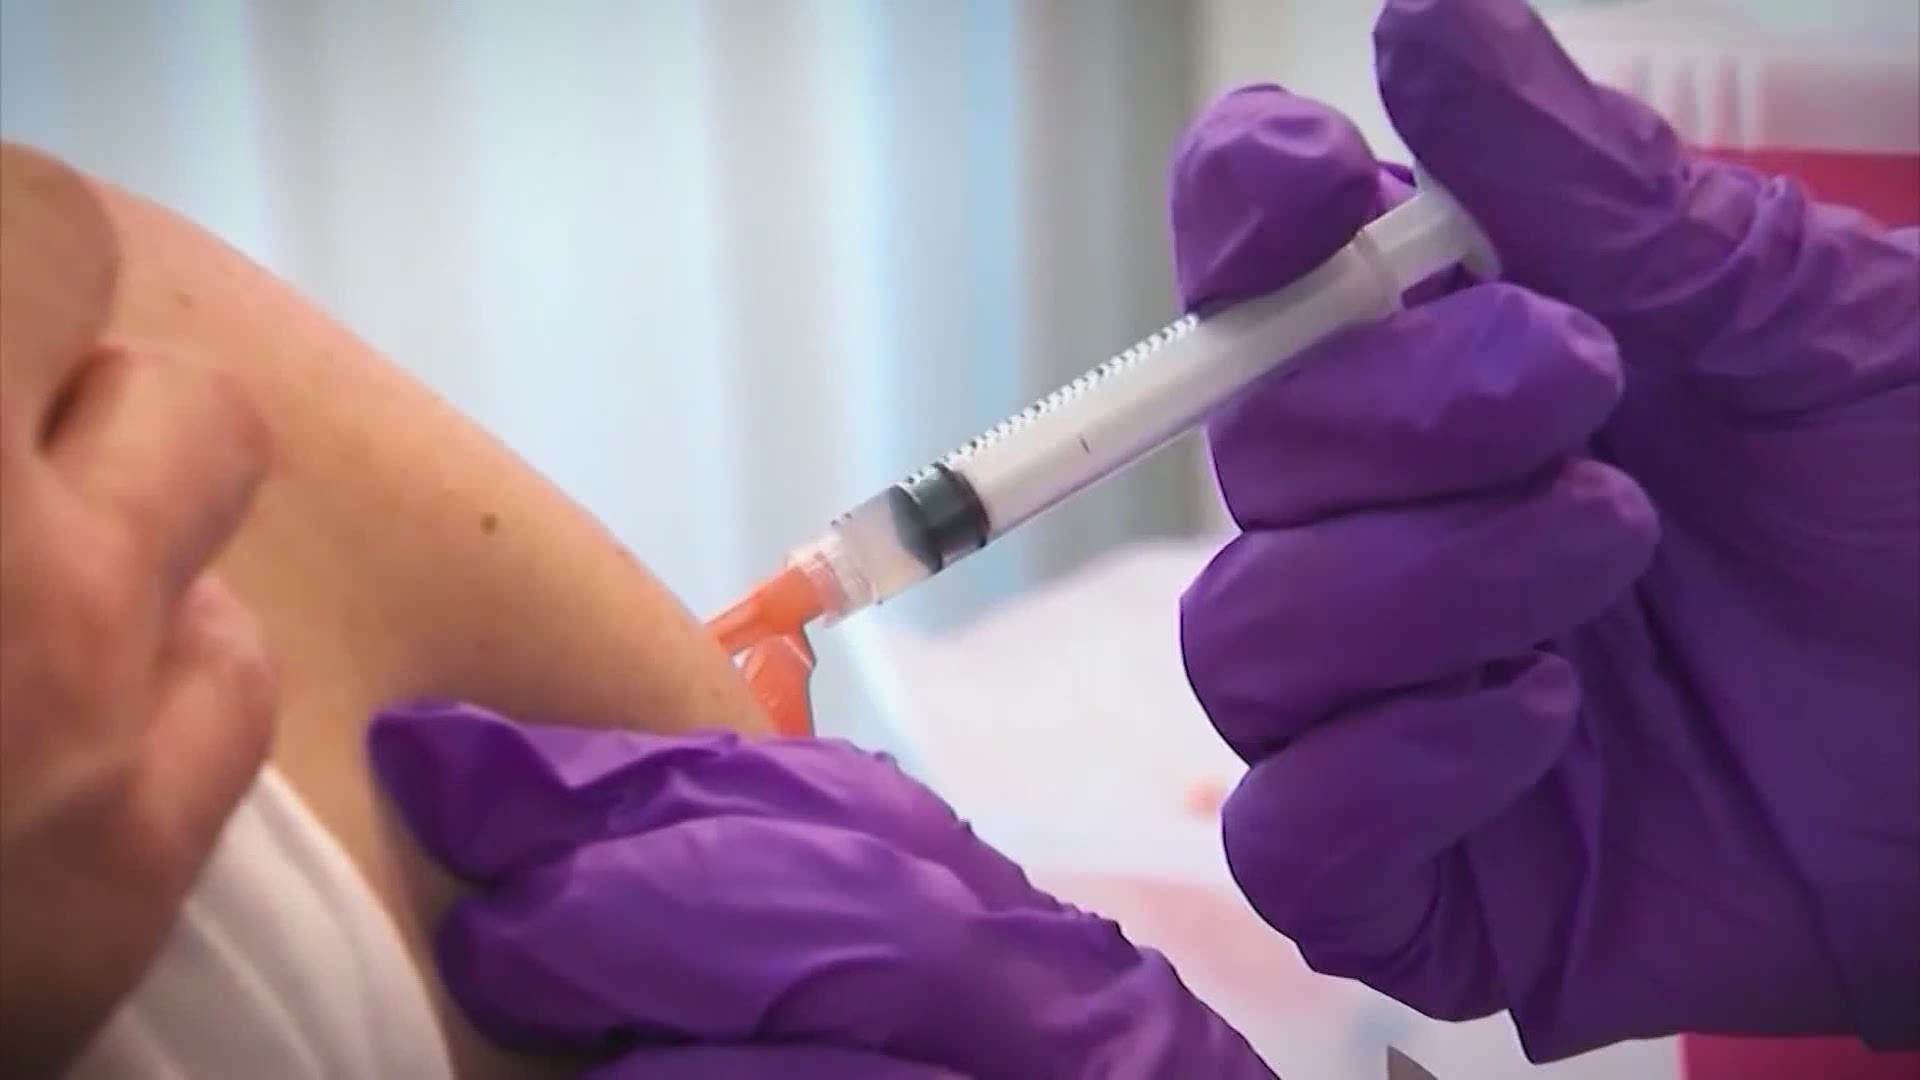 Harris County and community leaders fear undocumented people may be putting themselves at risk by not getting vaccinated.